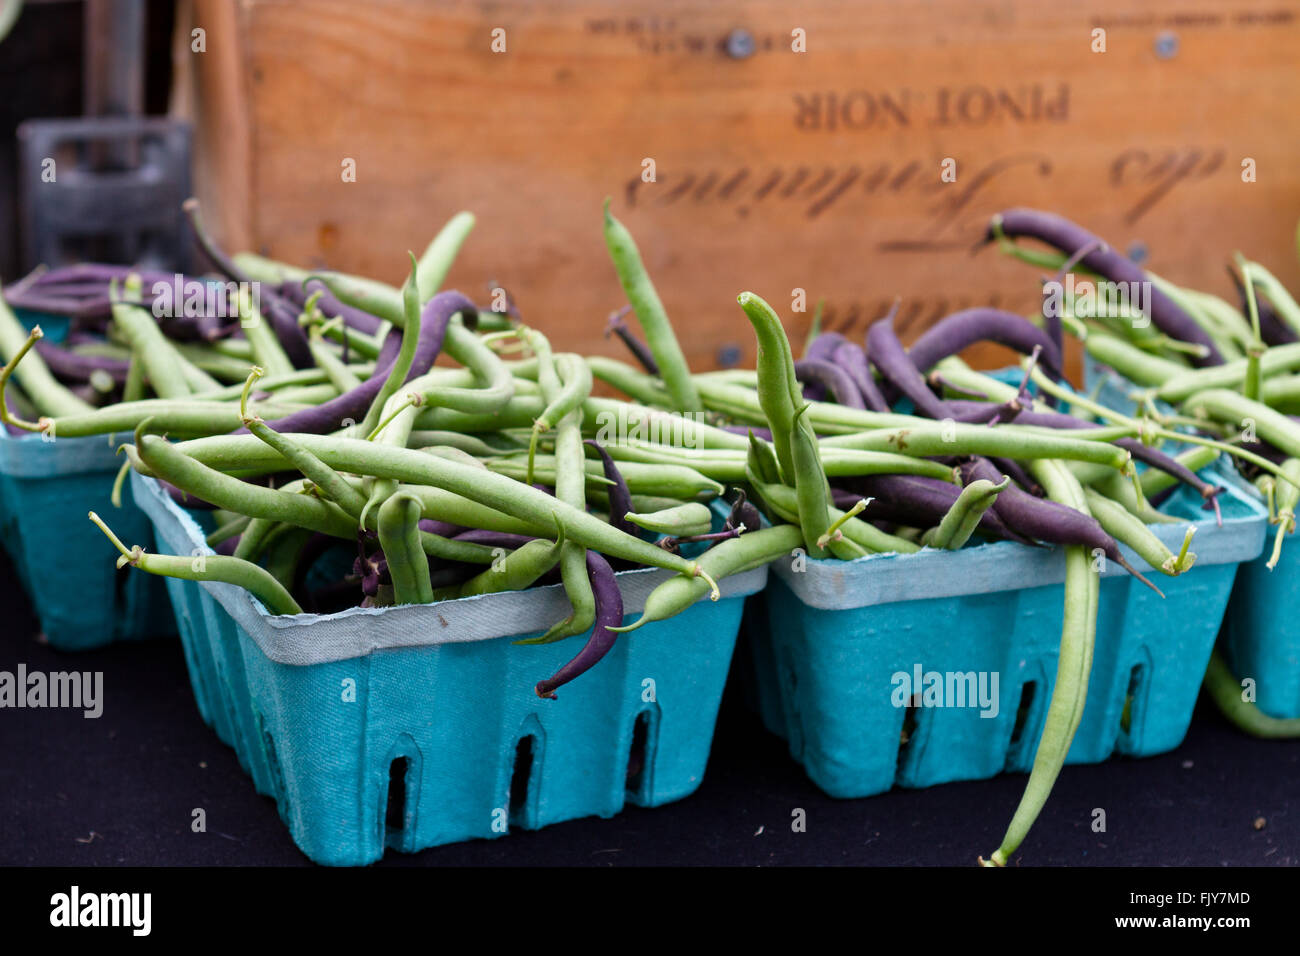 Green and purple beans in baskets with a rustic crate background at market Stock Photo